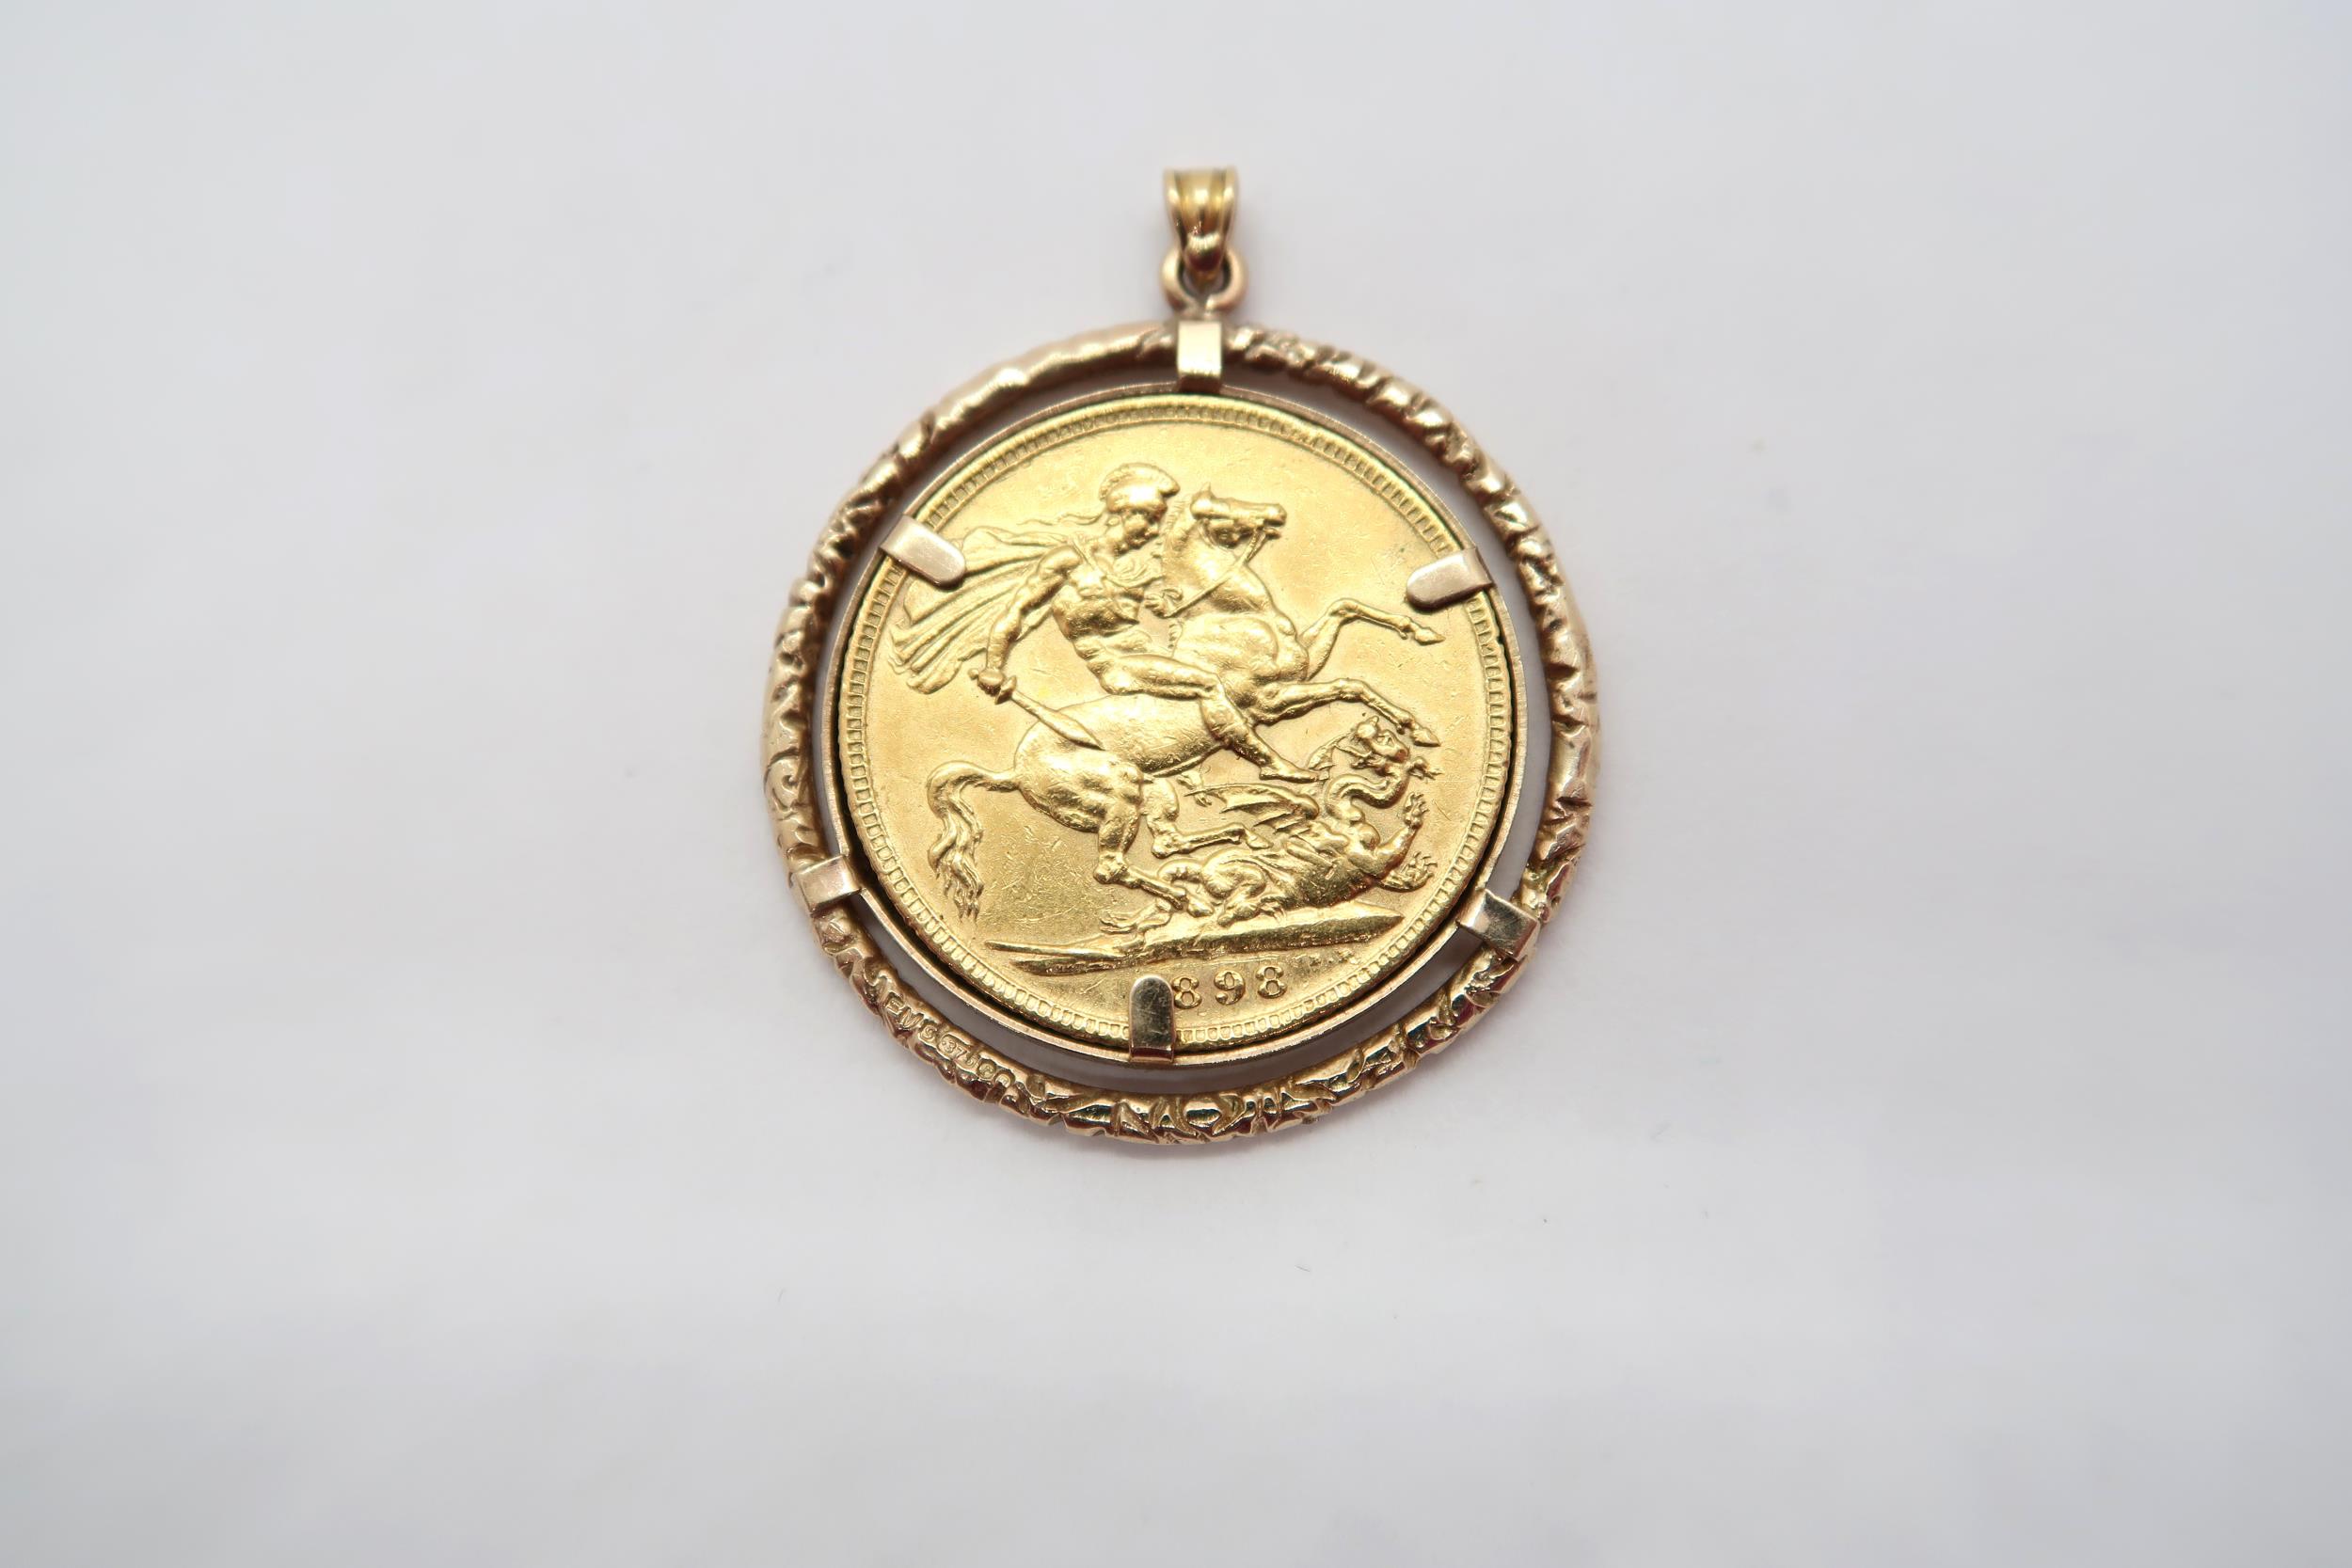 A Victorian sovereign dated 1898 in a gold mount - total weight approx 10.5 grams